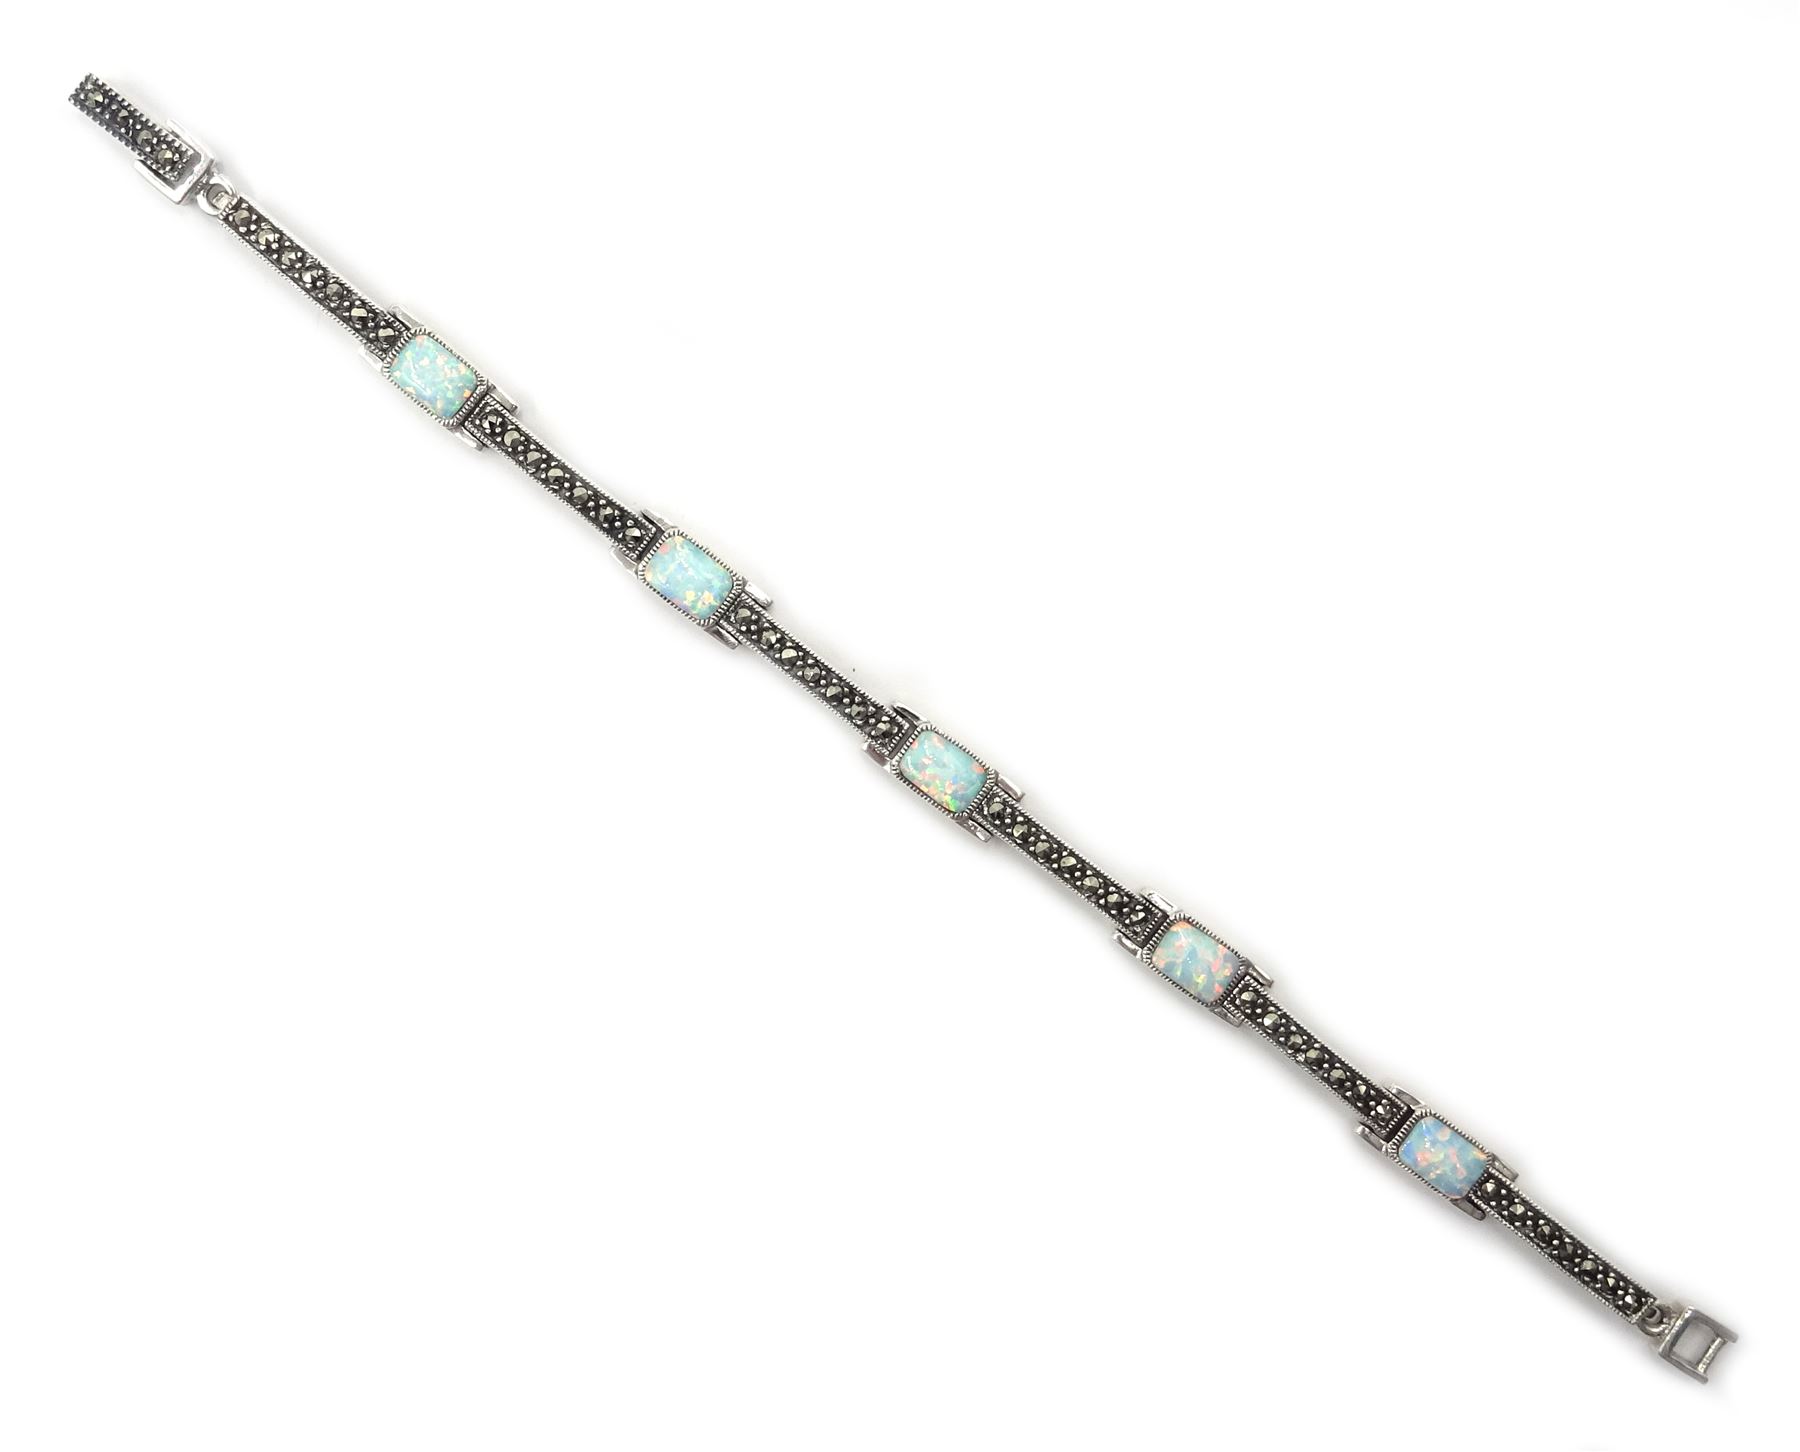 Silver opal and marcasite link bracelet - Image 2 of 3